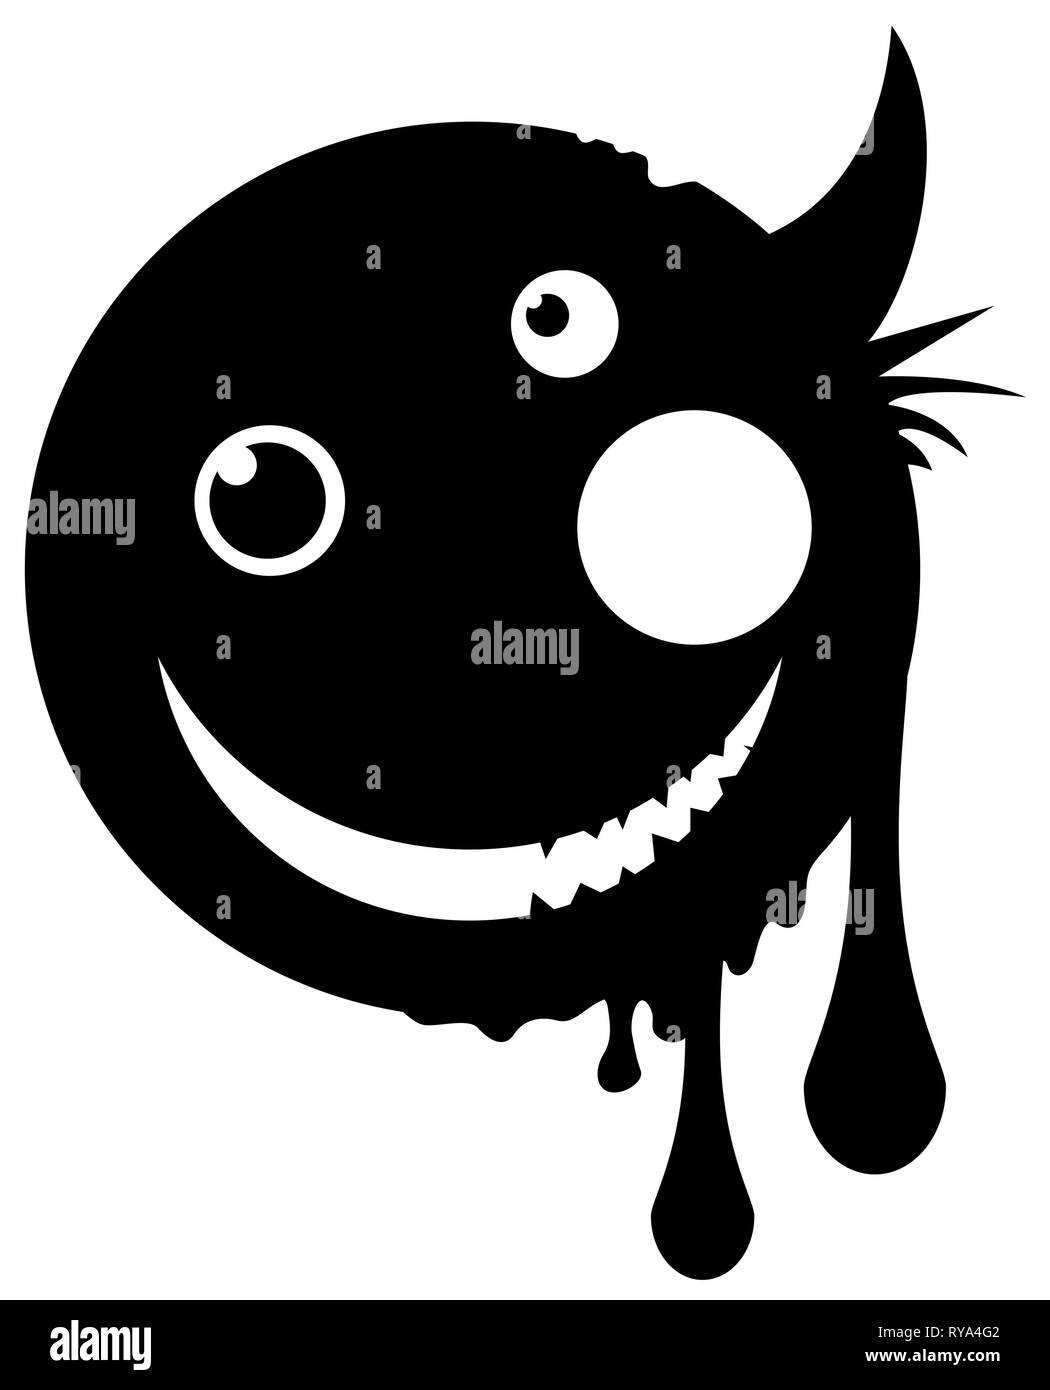 Mutant happy face round icon symbol stencil black, vector illustration, horizontal, over white, isolated Stock Vector